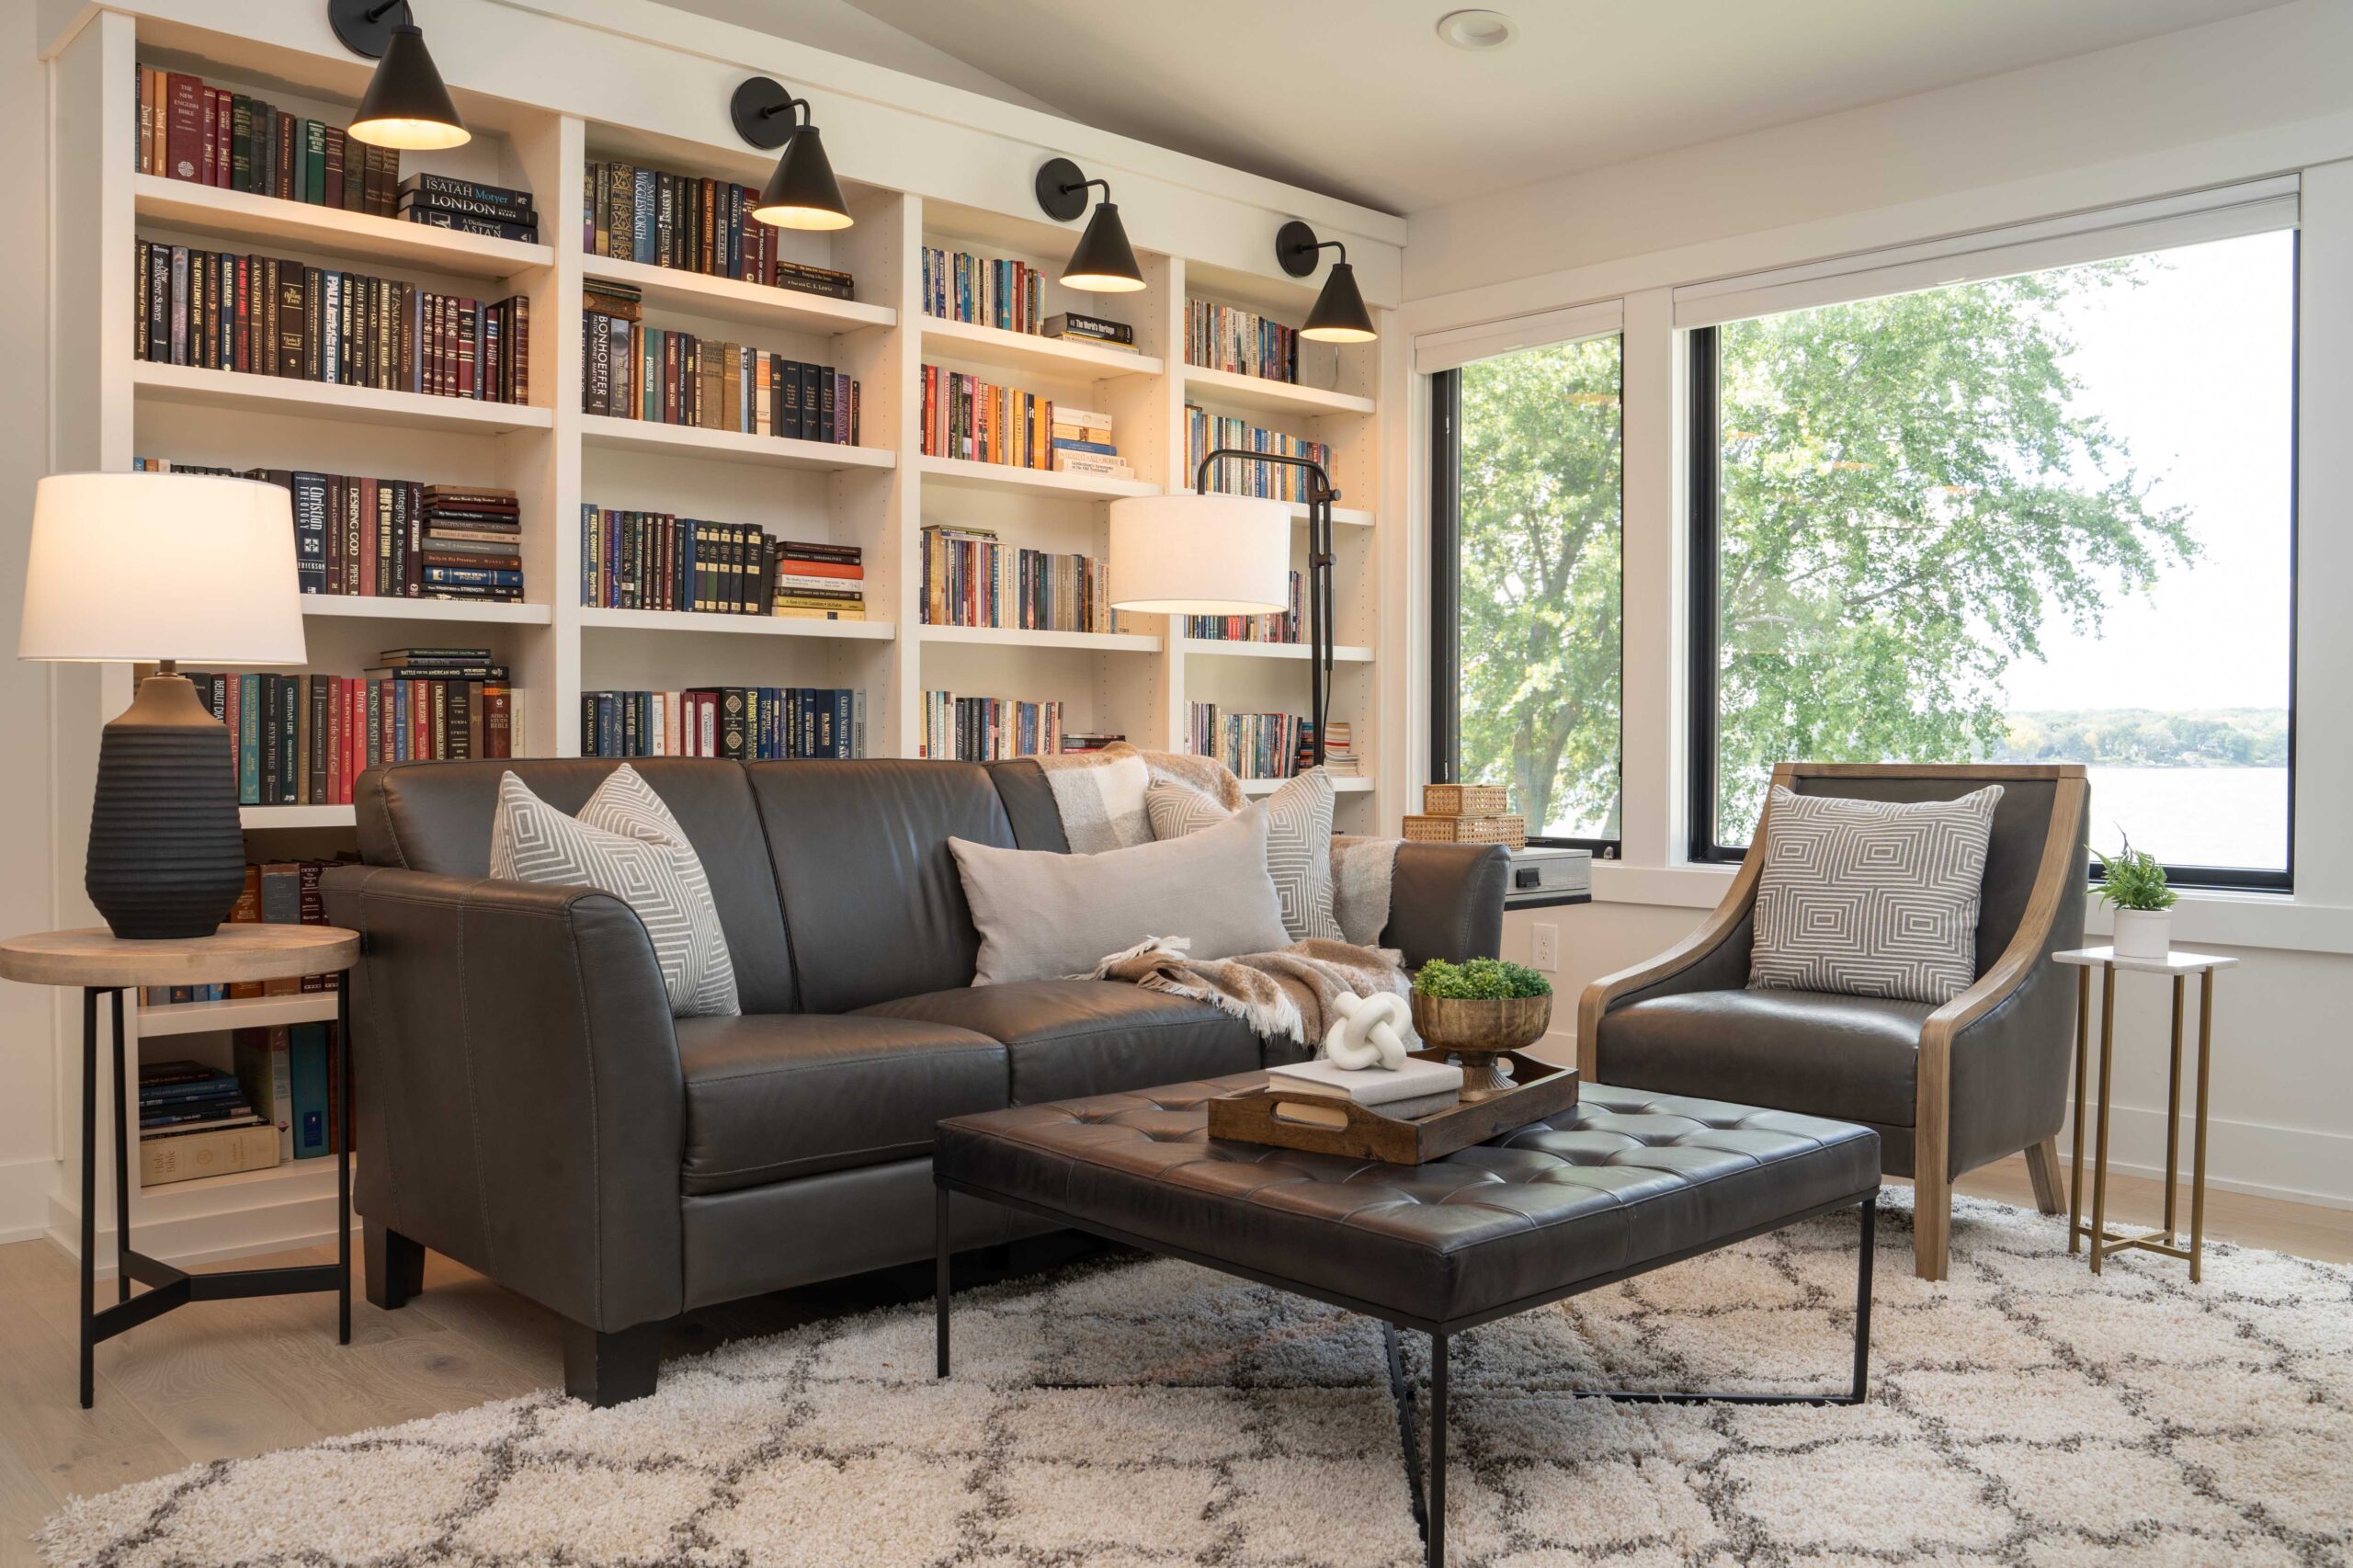 An Orchard Lake remodel with a living room featuring a couch, coffee table, and bookshelves.